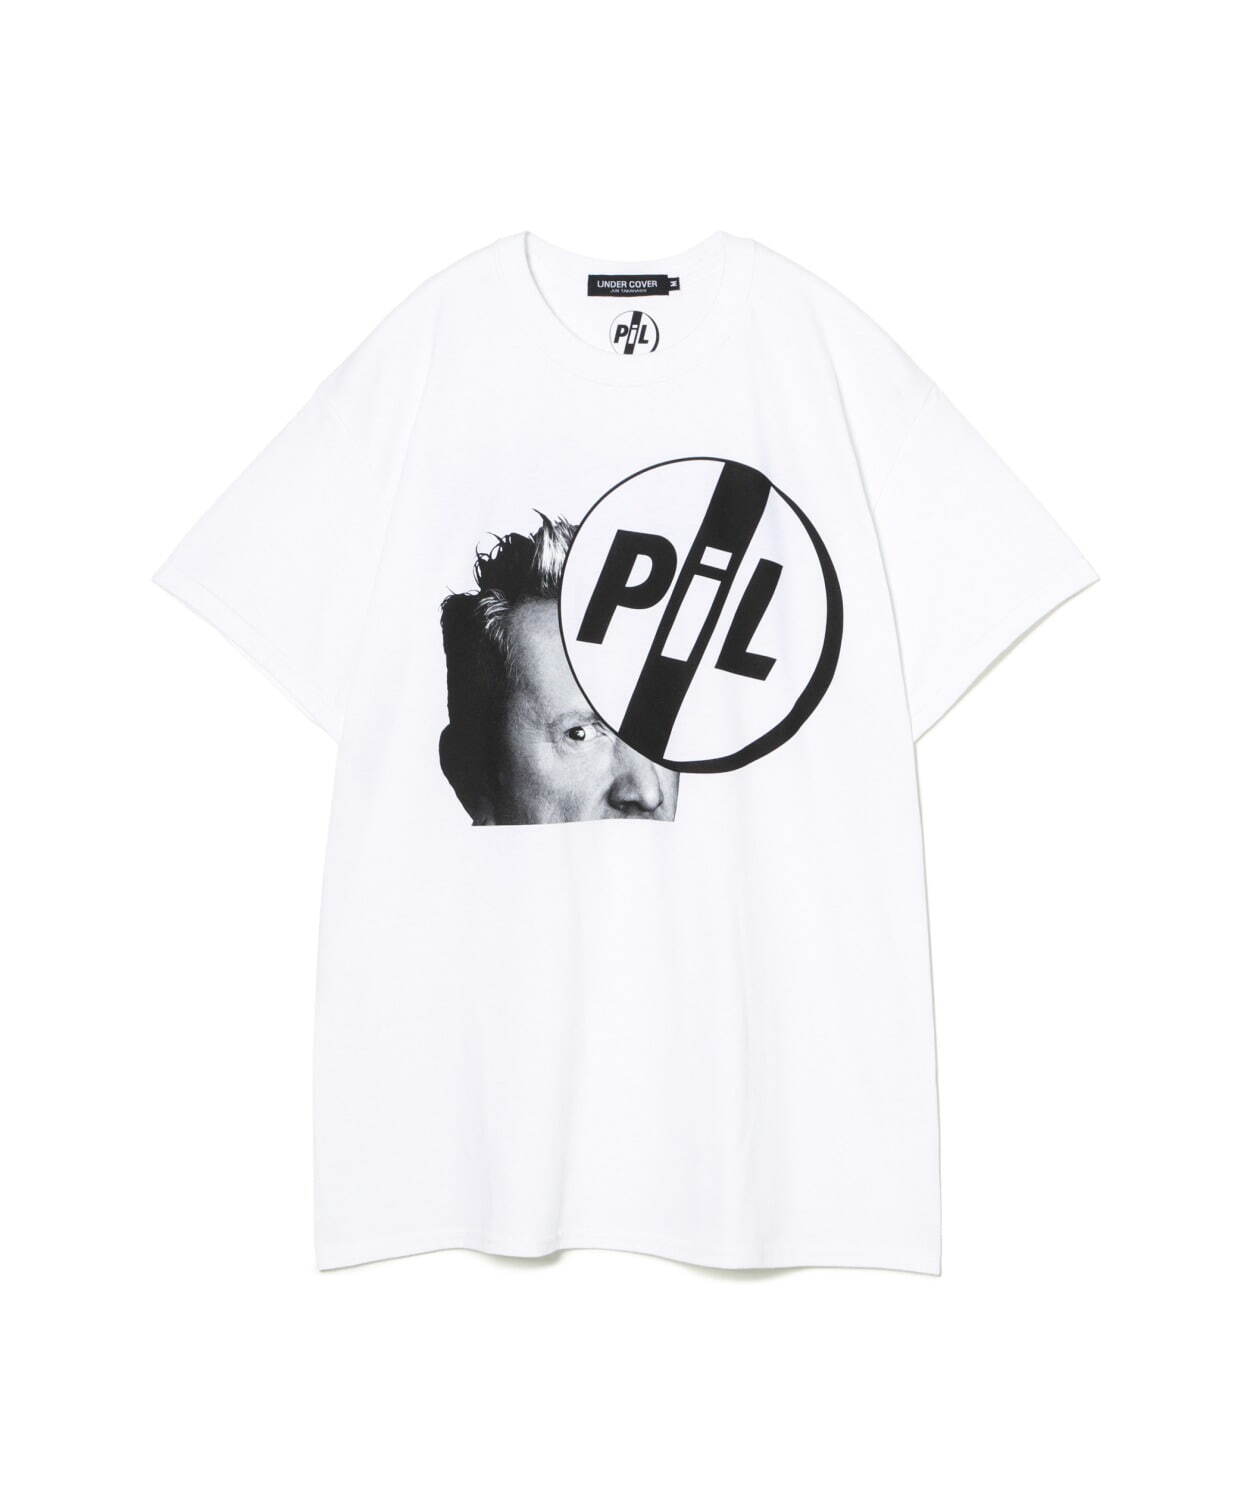 Undercover xPIL public image limited tee